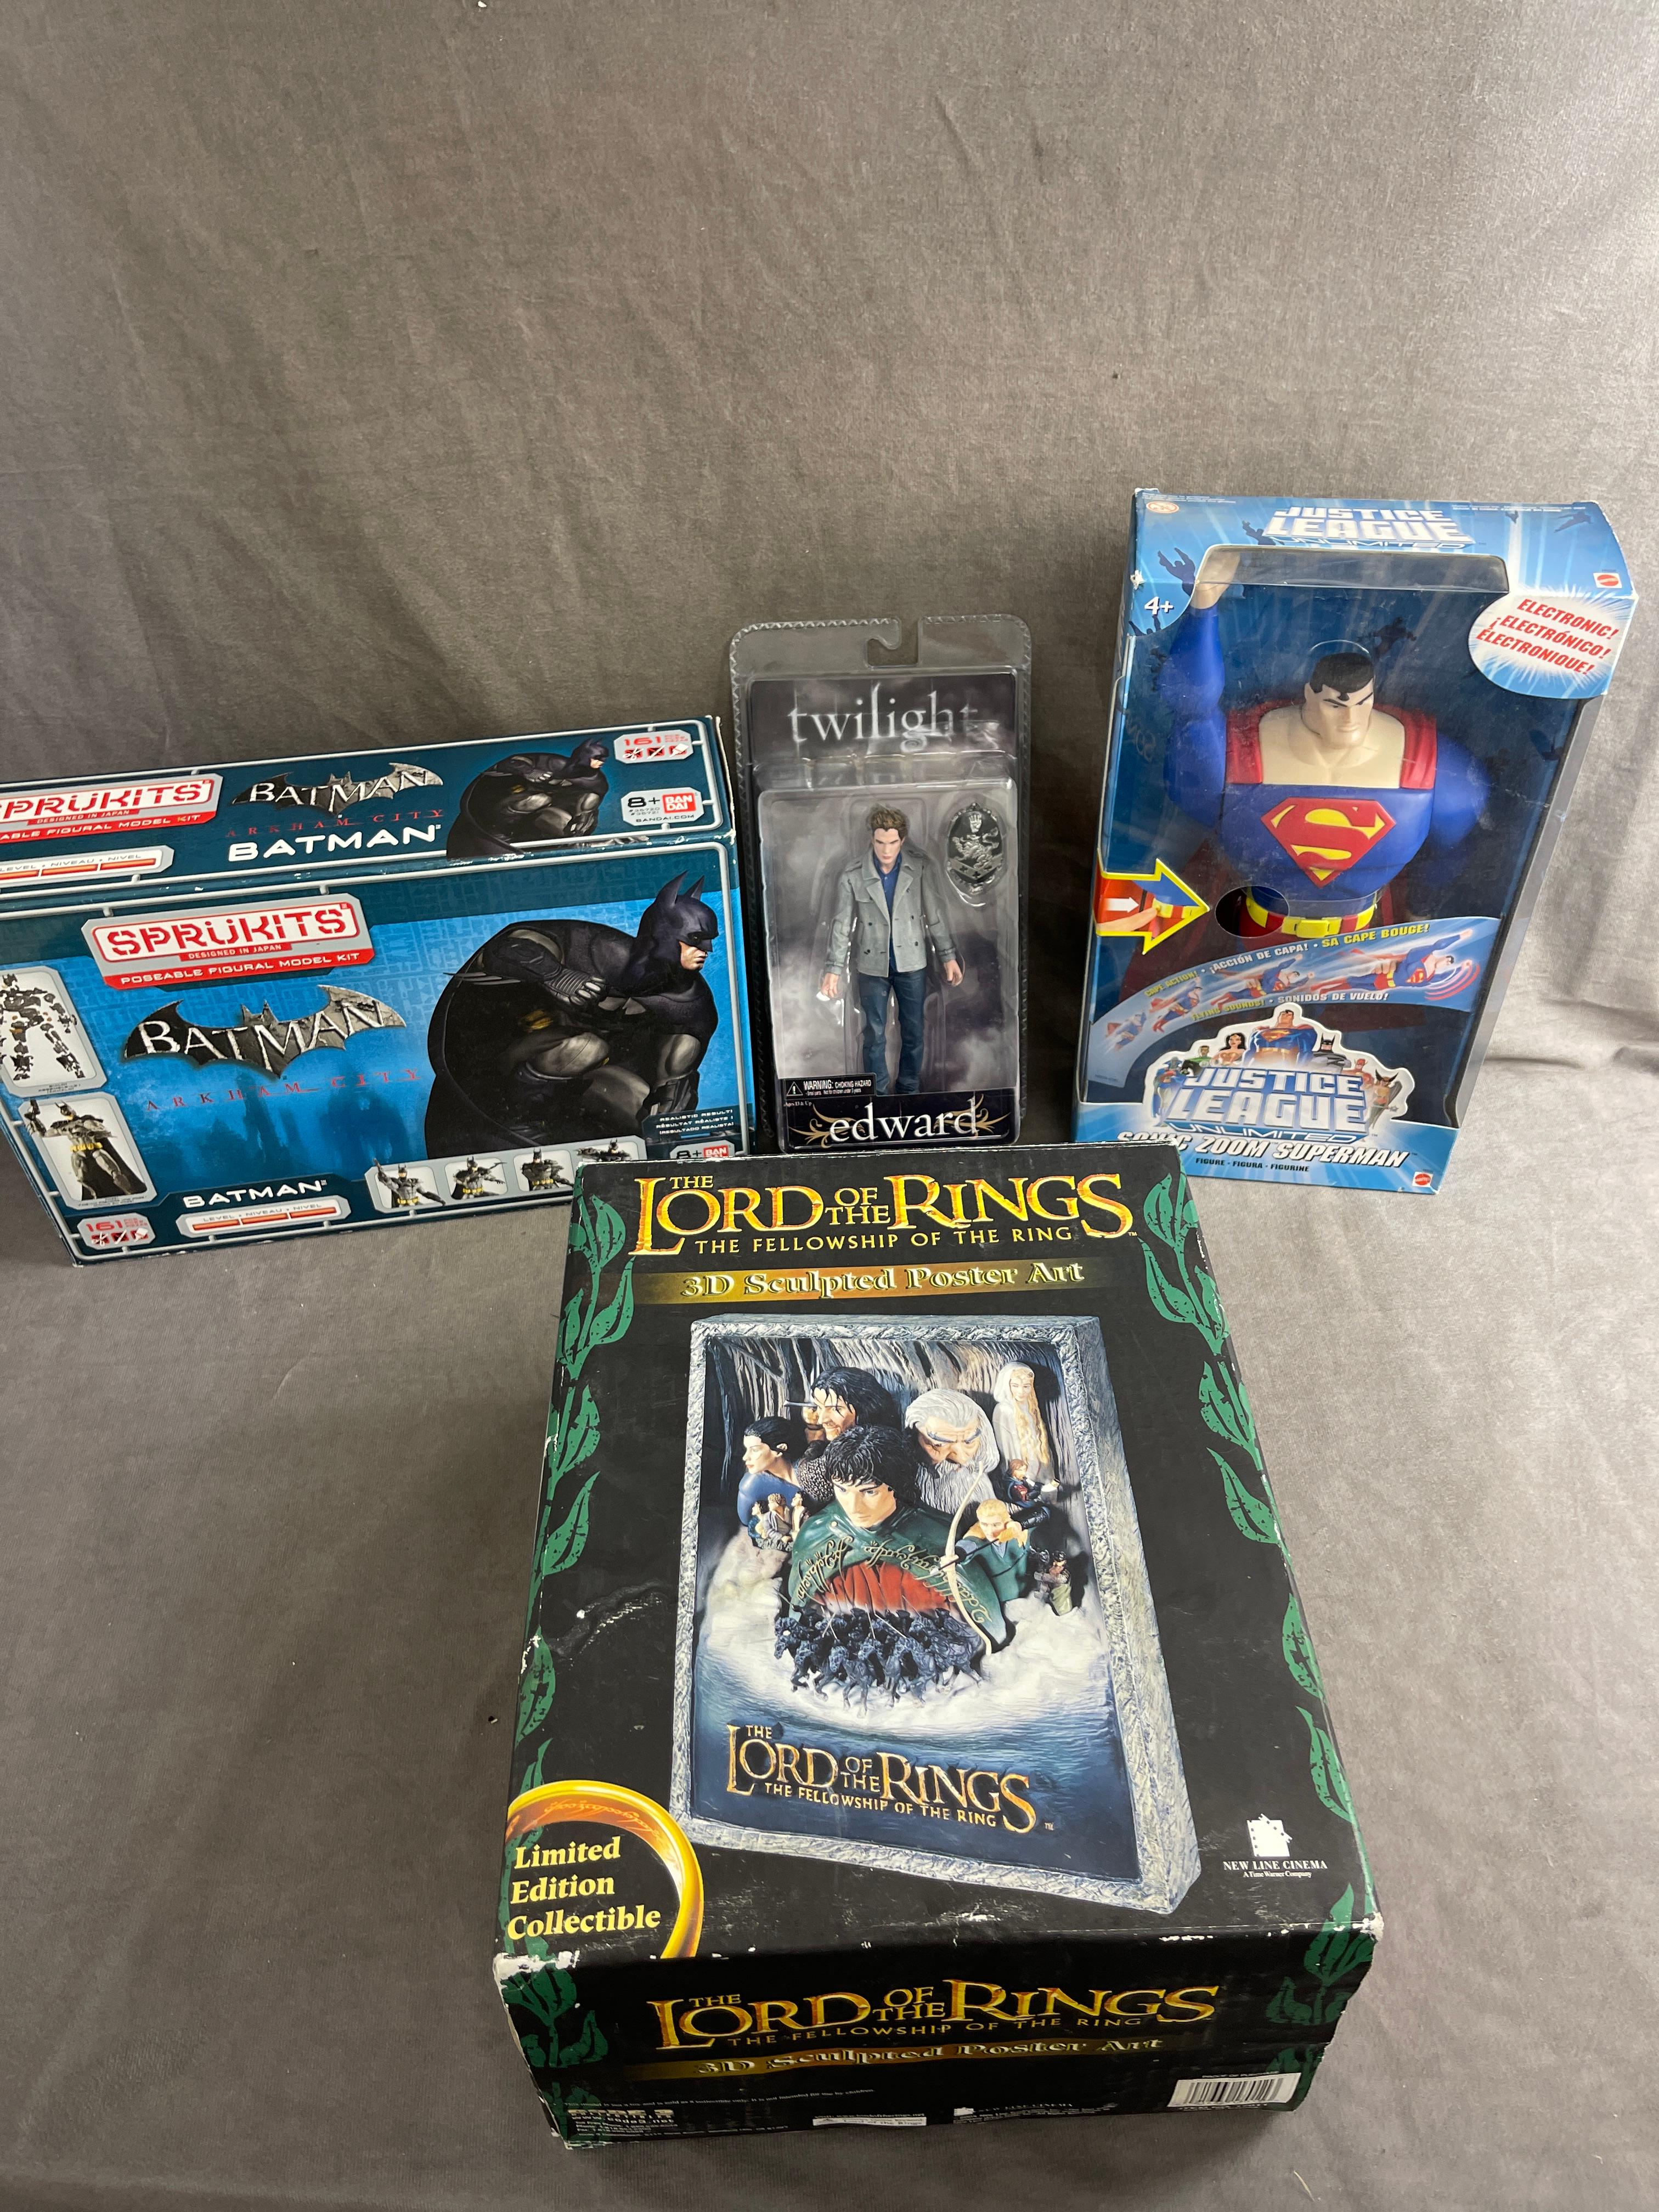 Mixed DC Figurines and Figural Model Kit Lord of the Rings Collection Lot